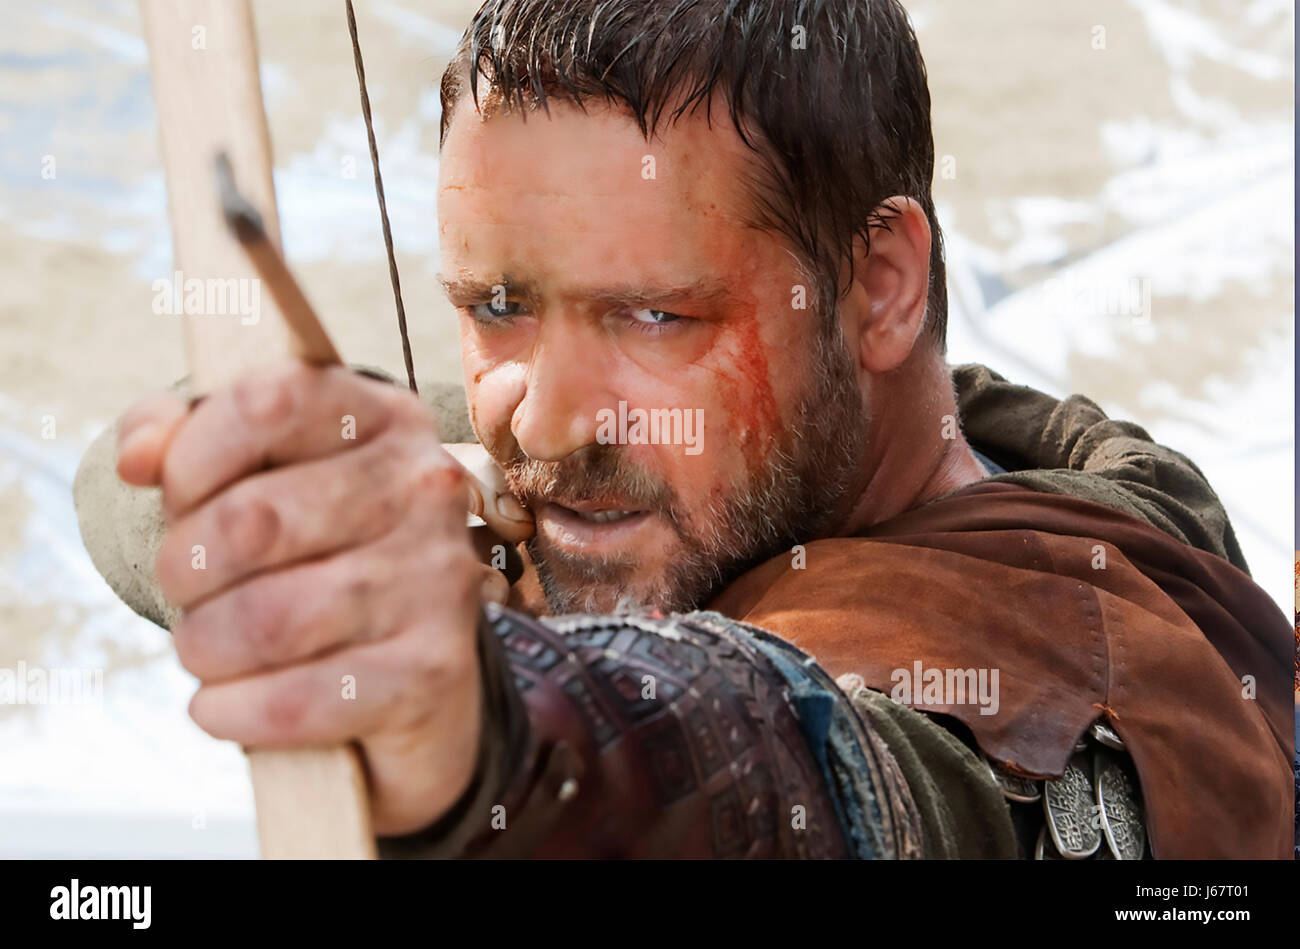 ROBIN HOOD 2010 Universal film with Russell Crowe Stock Photo